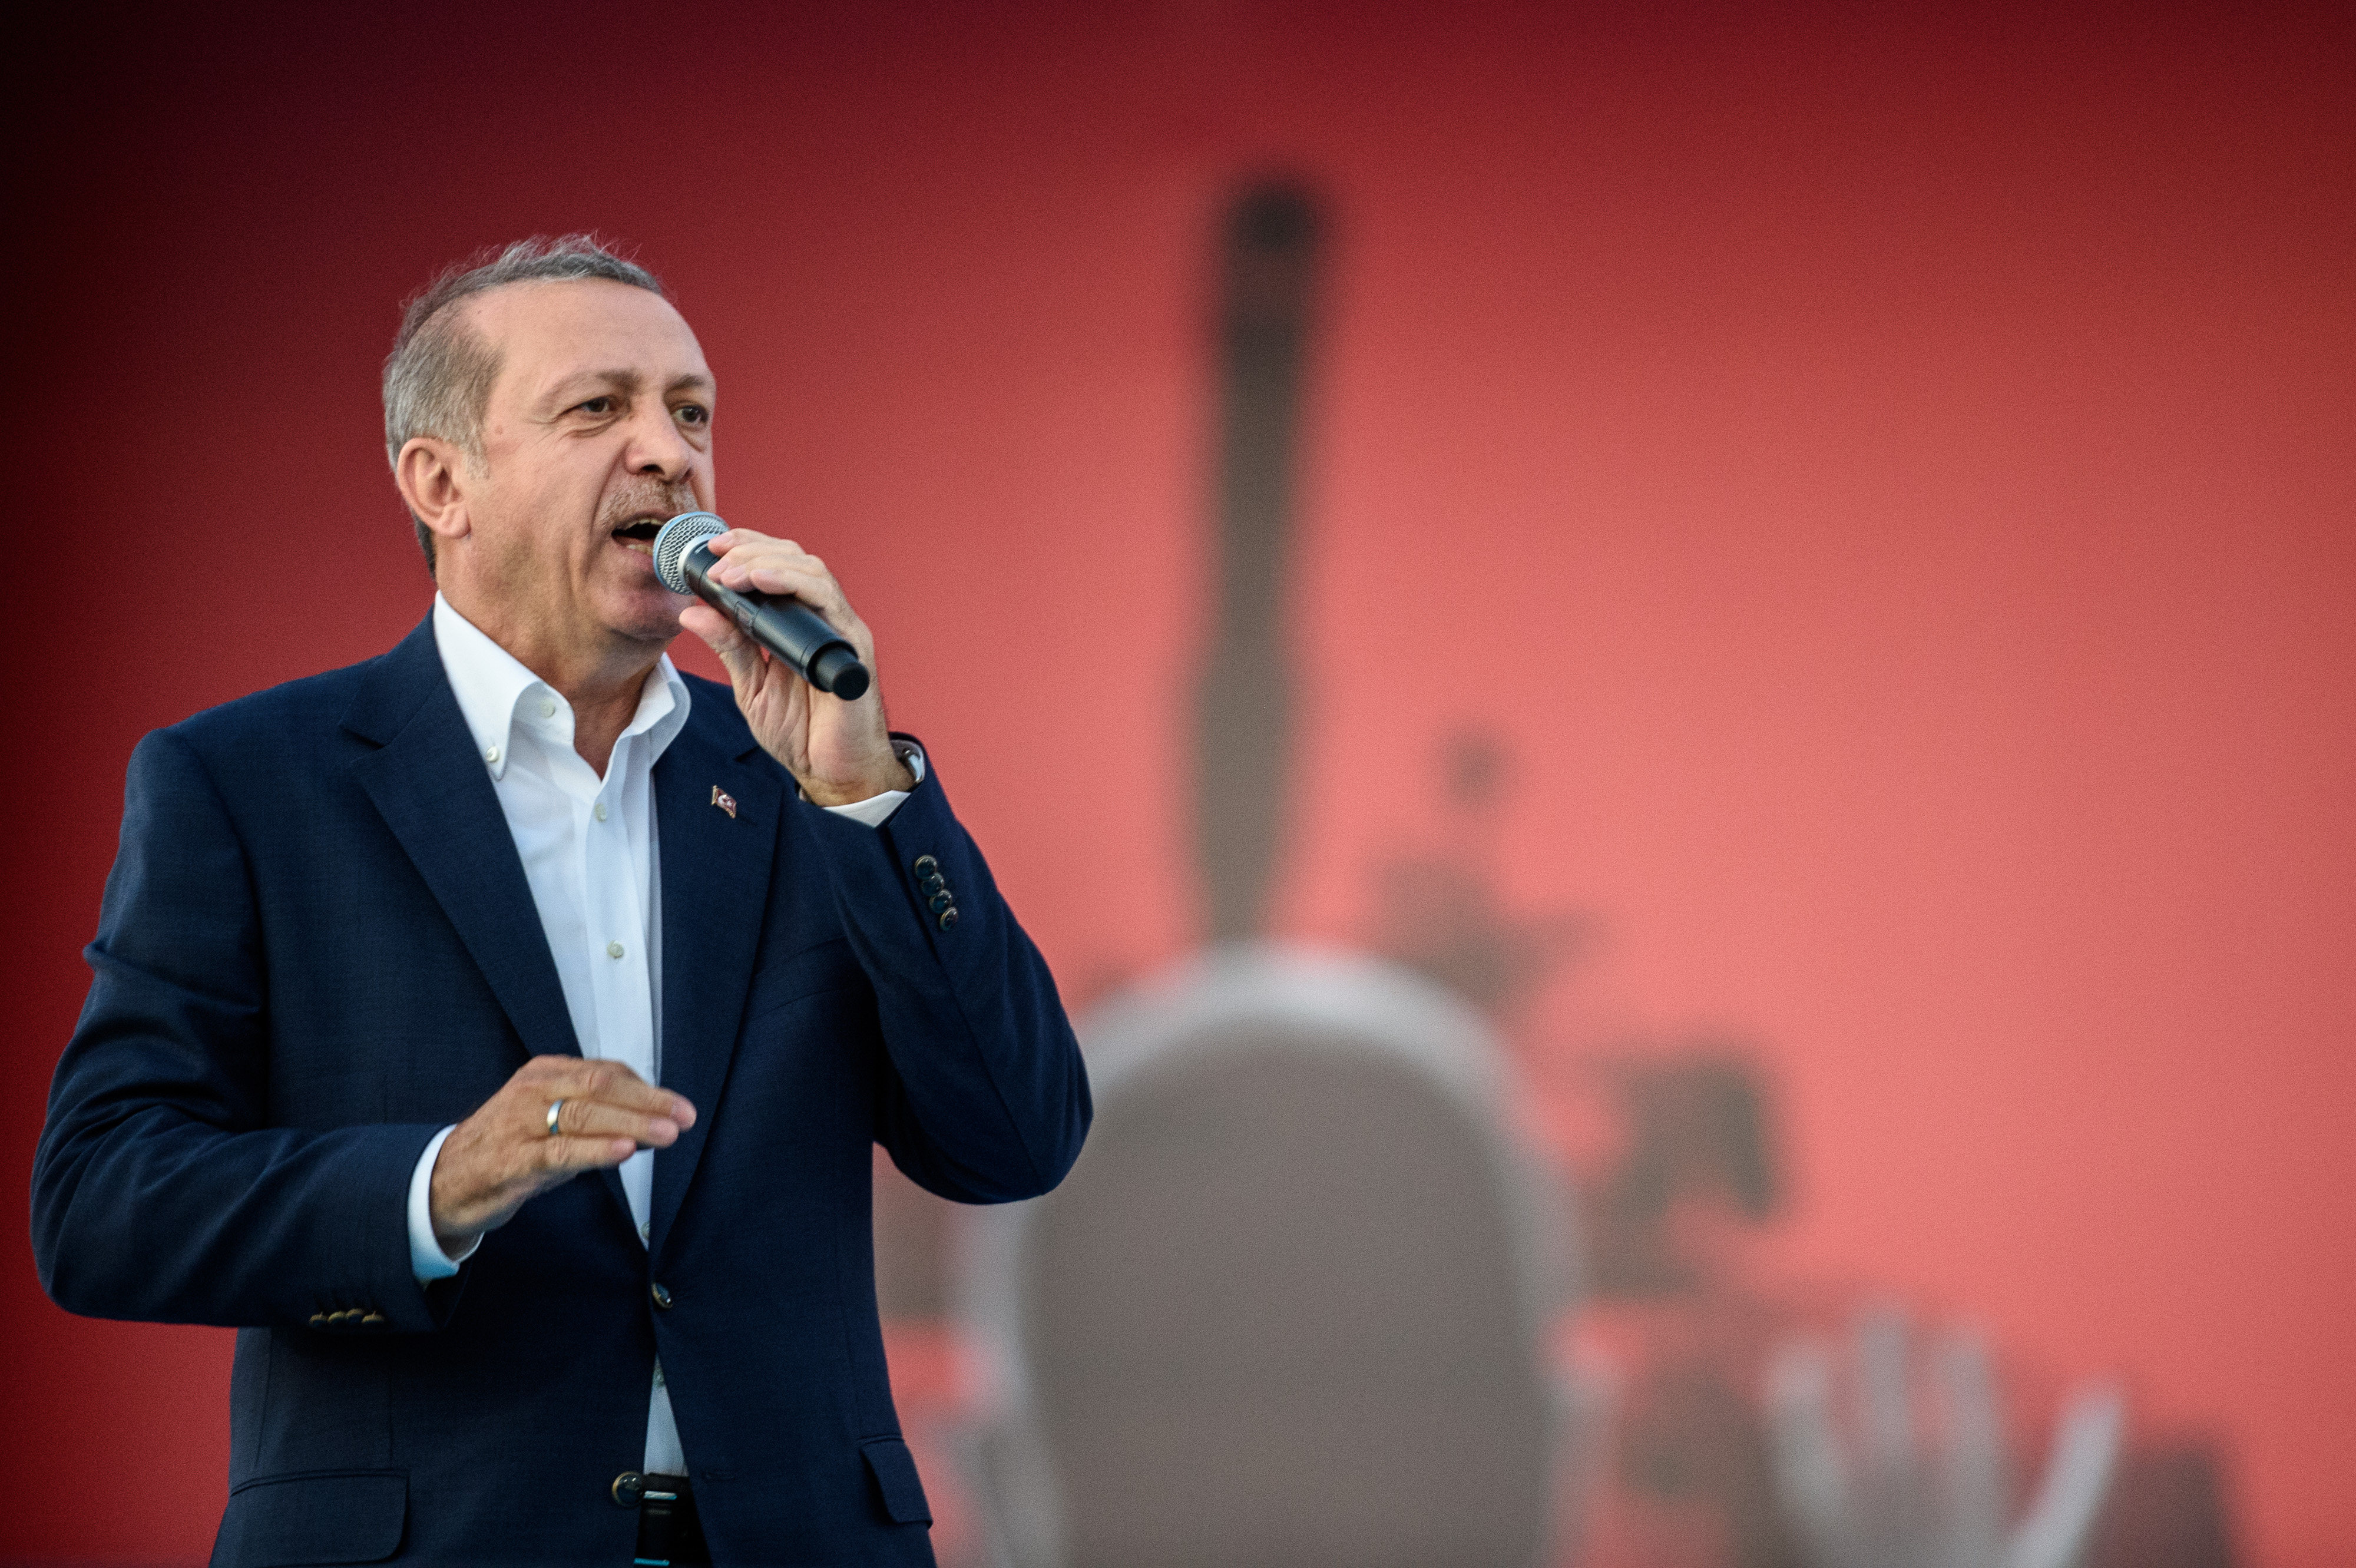 Turkish President Recep Tayyip Erdogan speaks on August 7, 2016 in Istanbul during a rally against the failed military coup on July 15.  Hundreds of thousands of people gathered in Istanbul for a pro-democracy rally organised by the ruling party, bringing to an end three weeks of demonstrations in support of President Recep Tayyip Erdogan after last month's failed coup.  / AFP PHOTO / OZAN KOSE